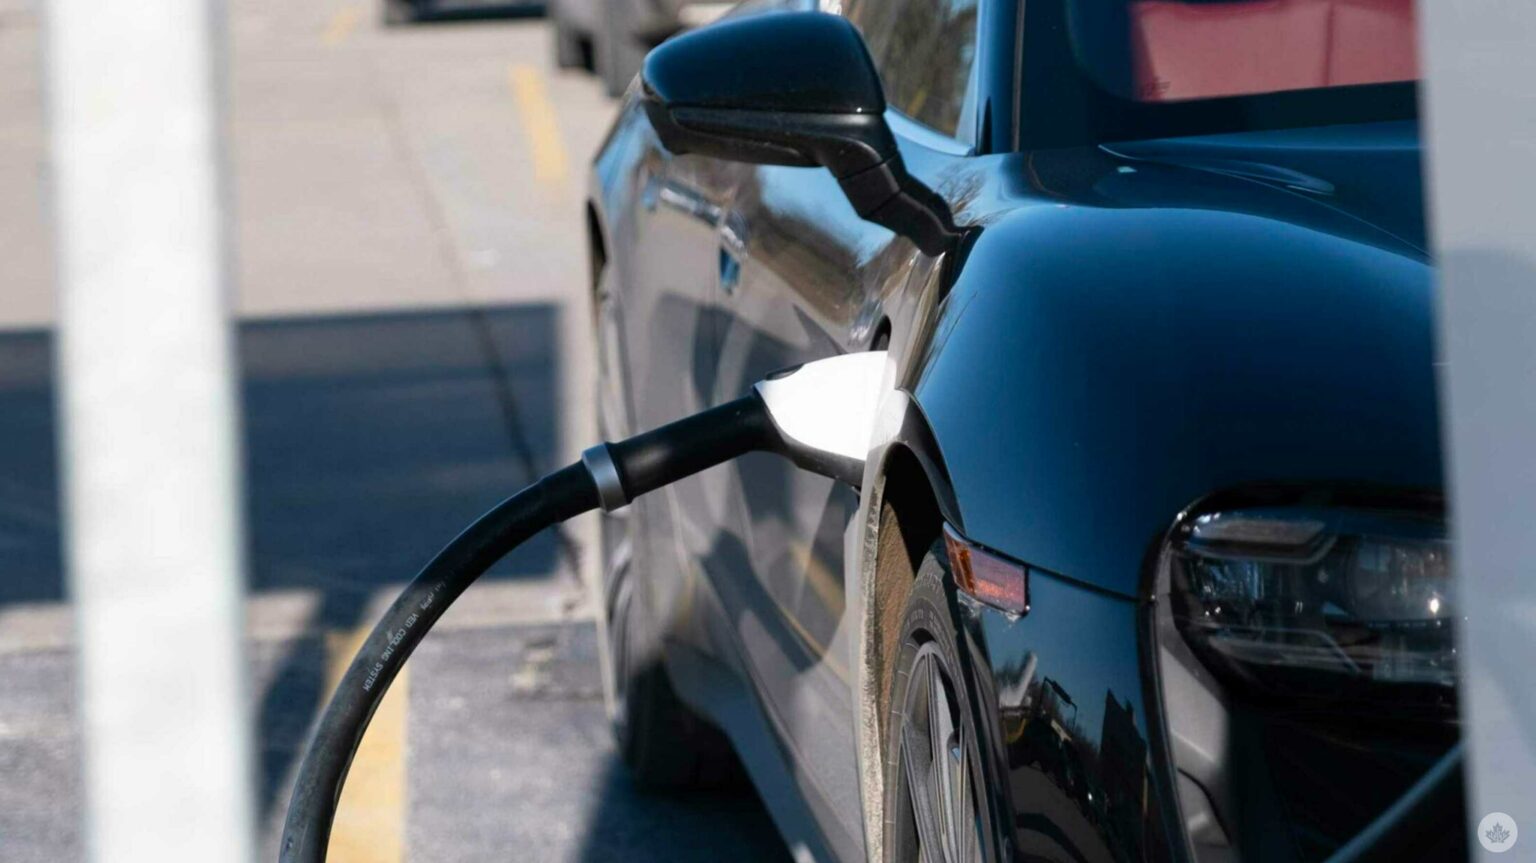 All new vehicles by 2035 must be zero-emission, Ottawa’s new EV regulation outlines thumbnail